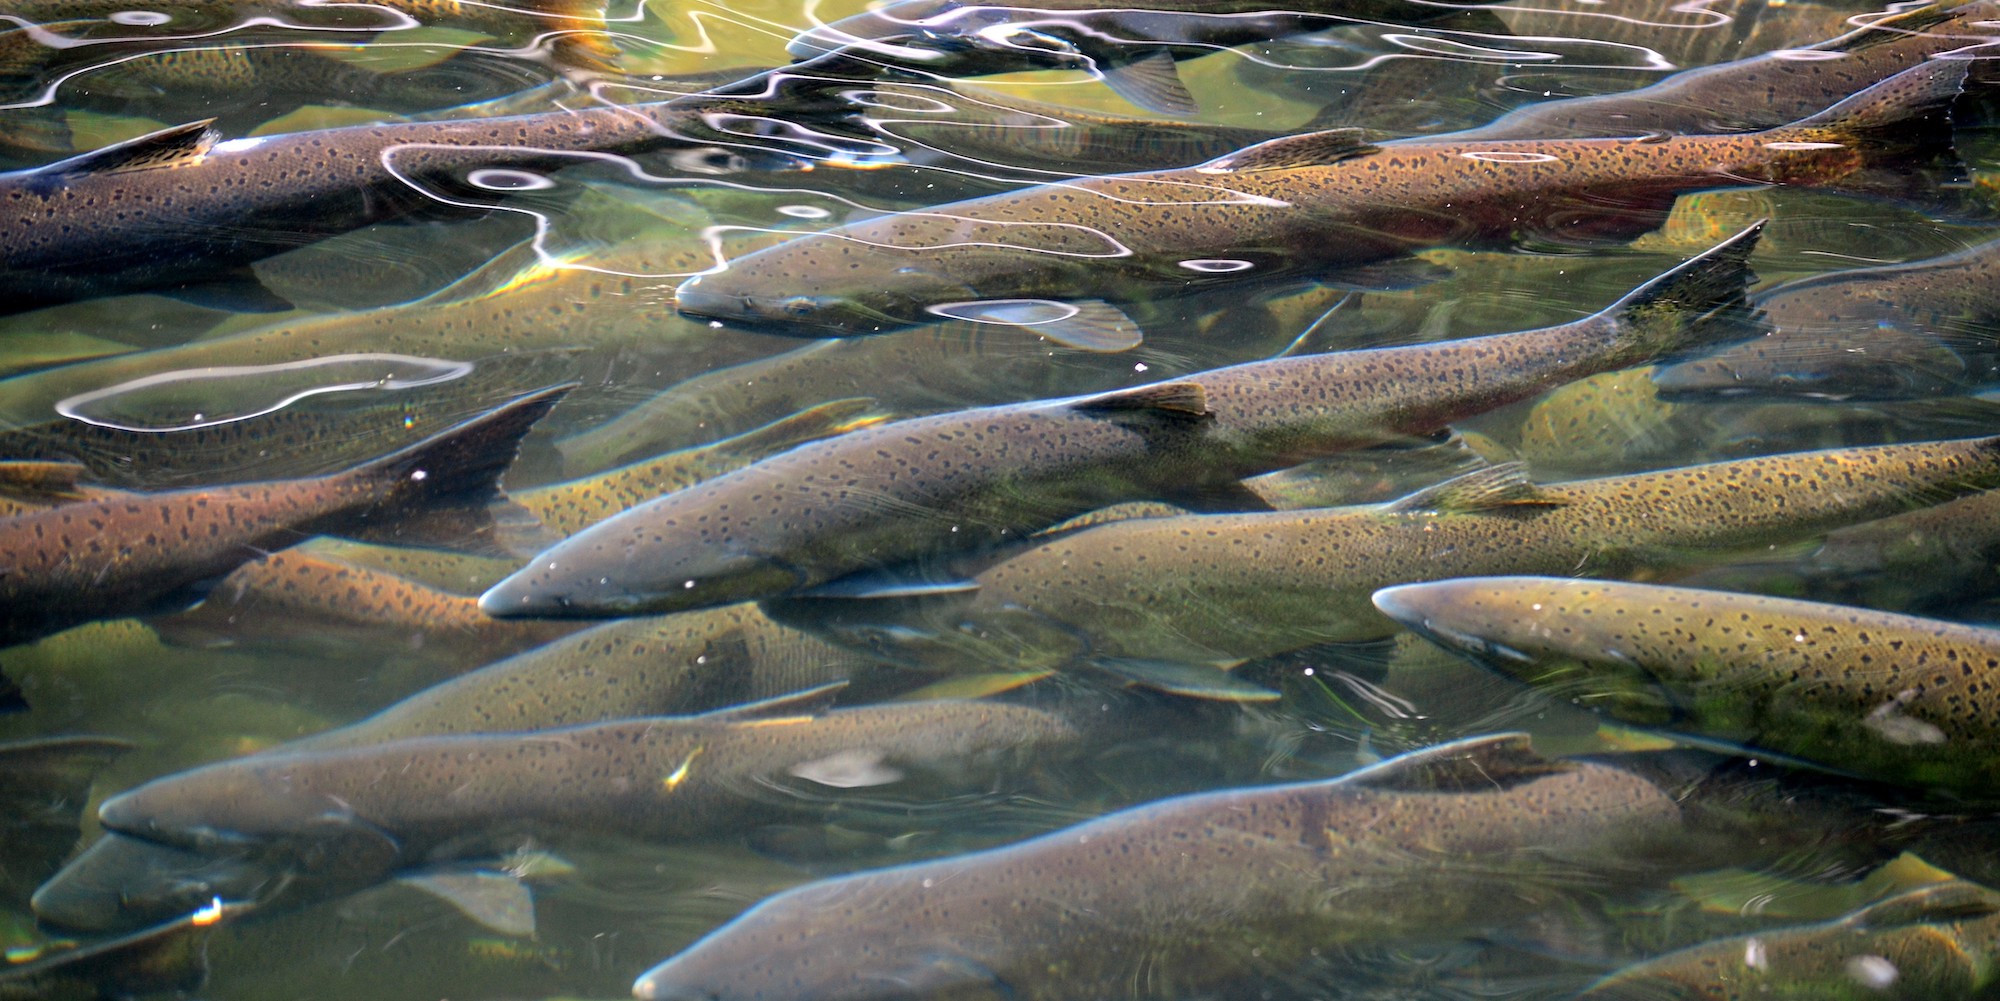 Group of chinook salmon swimming just under the surface of the water in a river